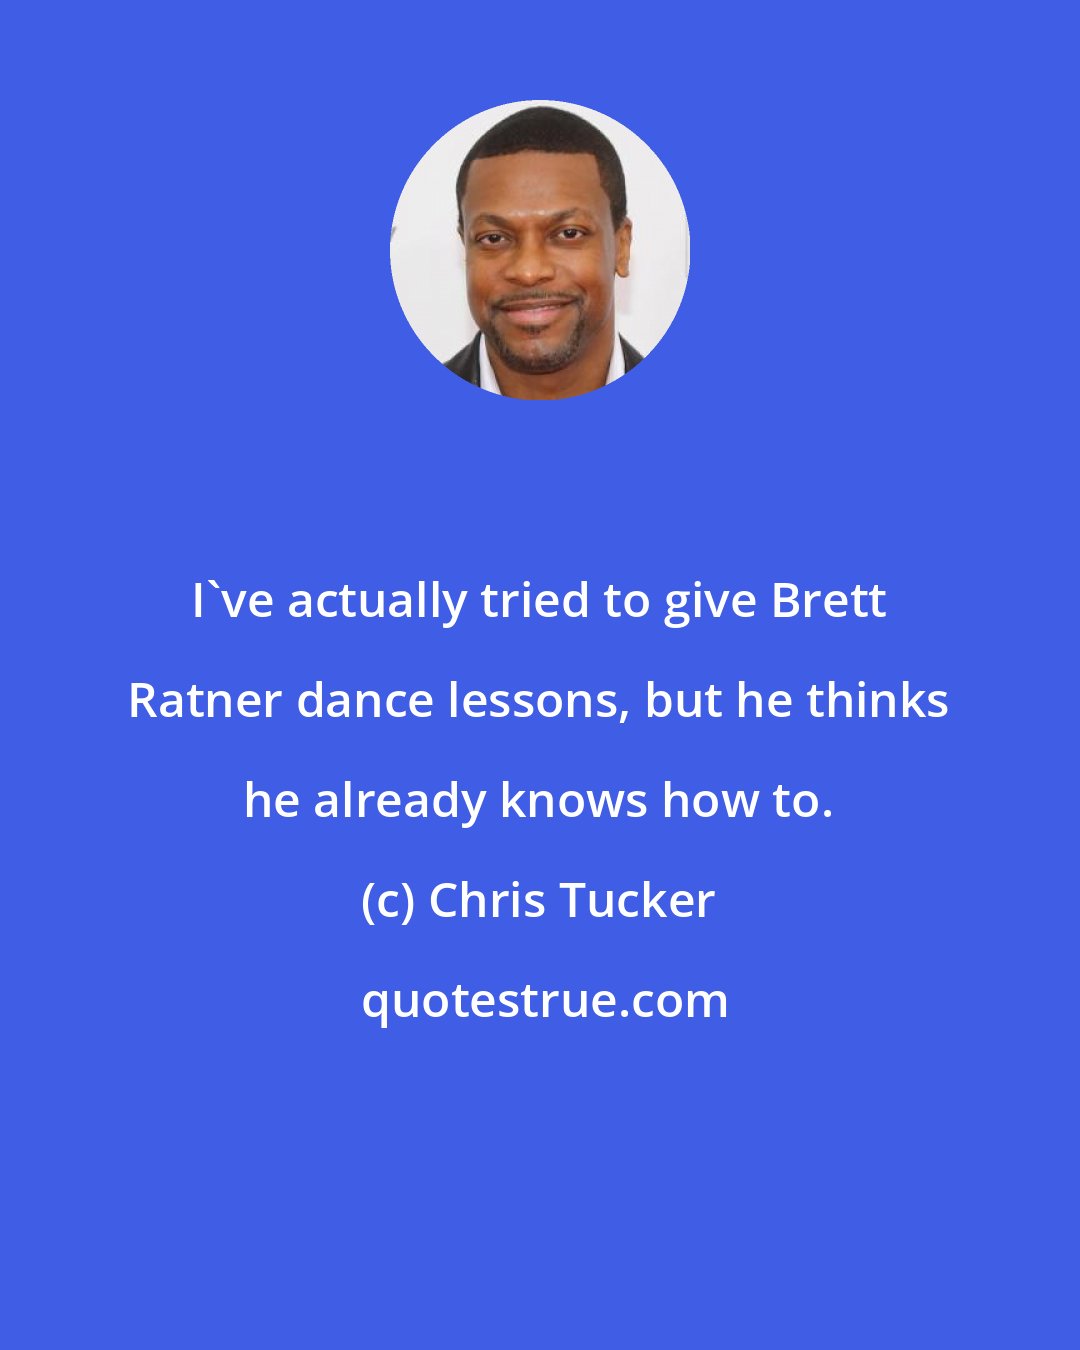 Chris Tucker: I've actually tried to give Brett Ratner dance lessons, but he thinks he already knows how to.